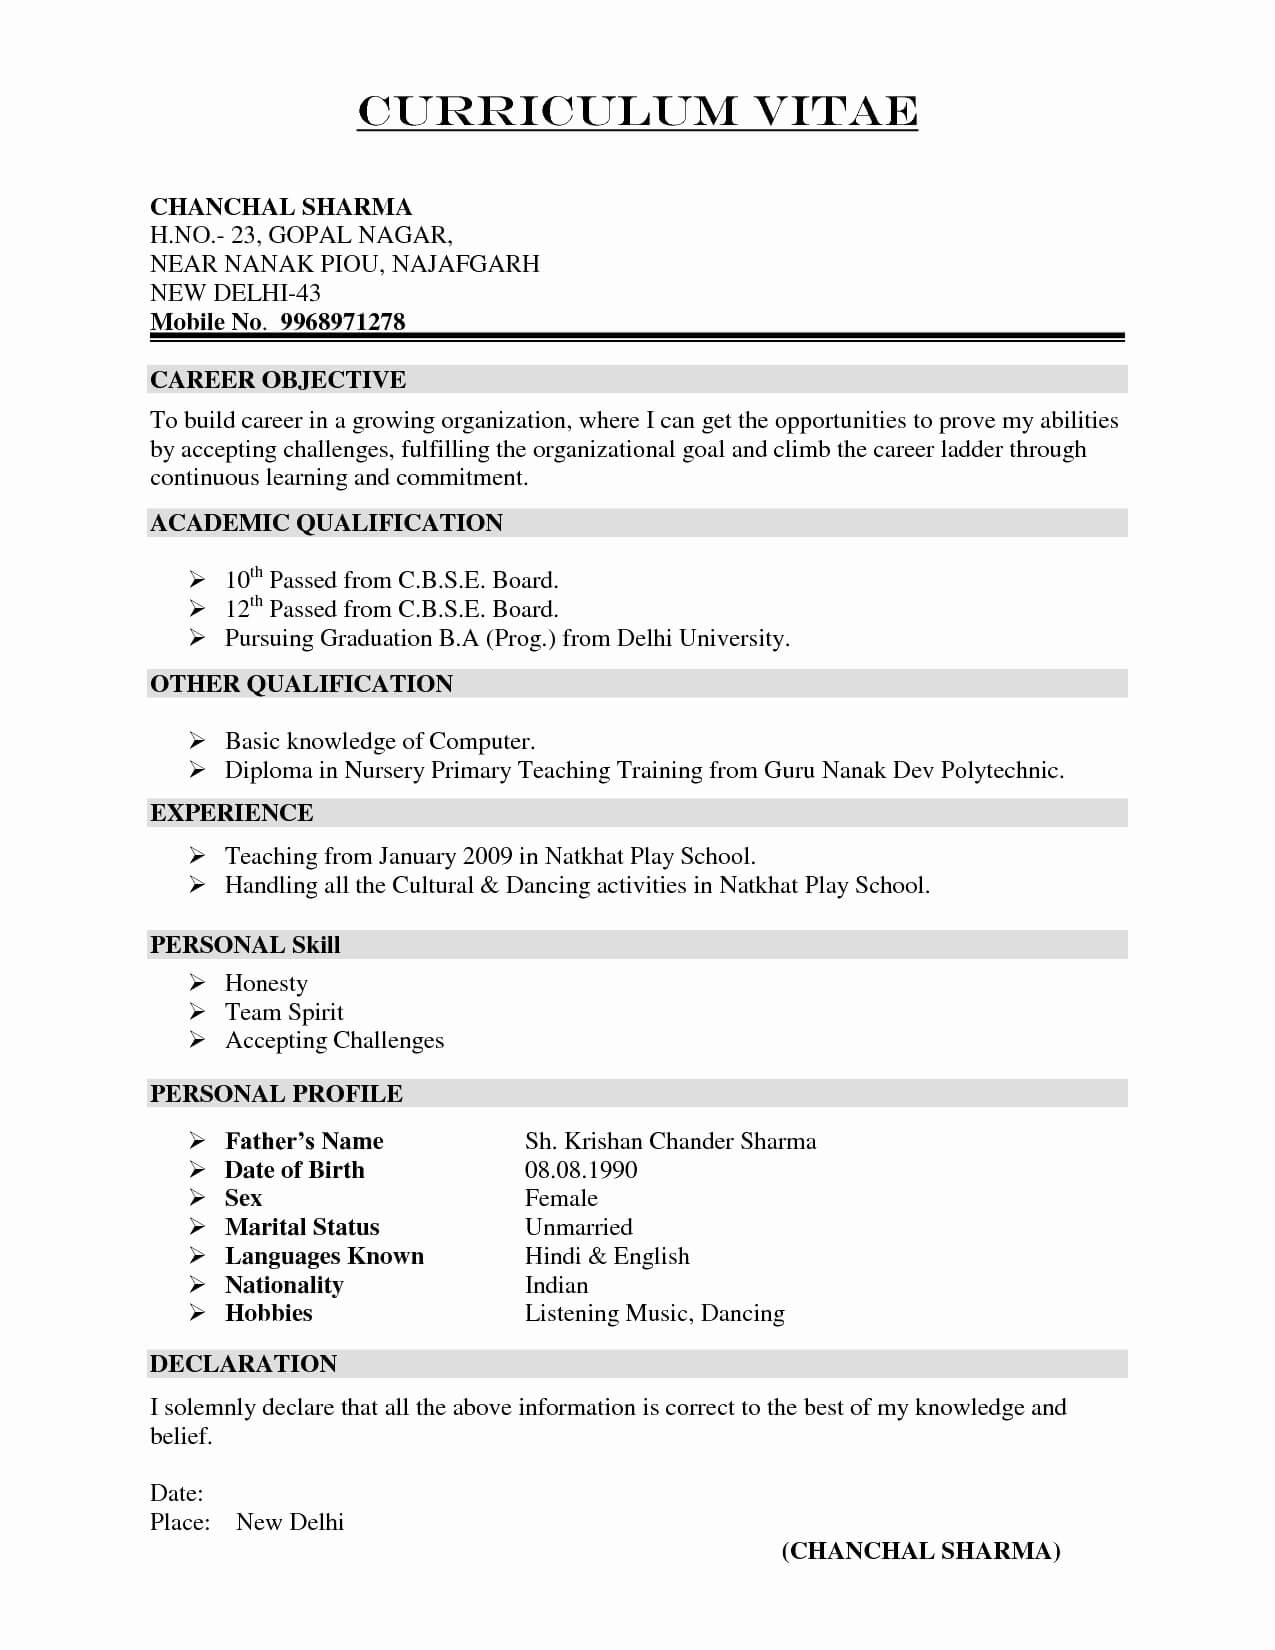 Free Blank Resume Templates For Microsoft Word – Yatay In Blank Resume Templates For Microsoft Word